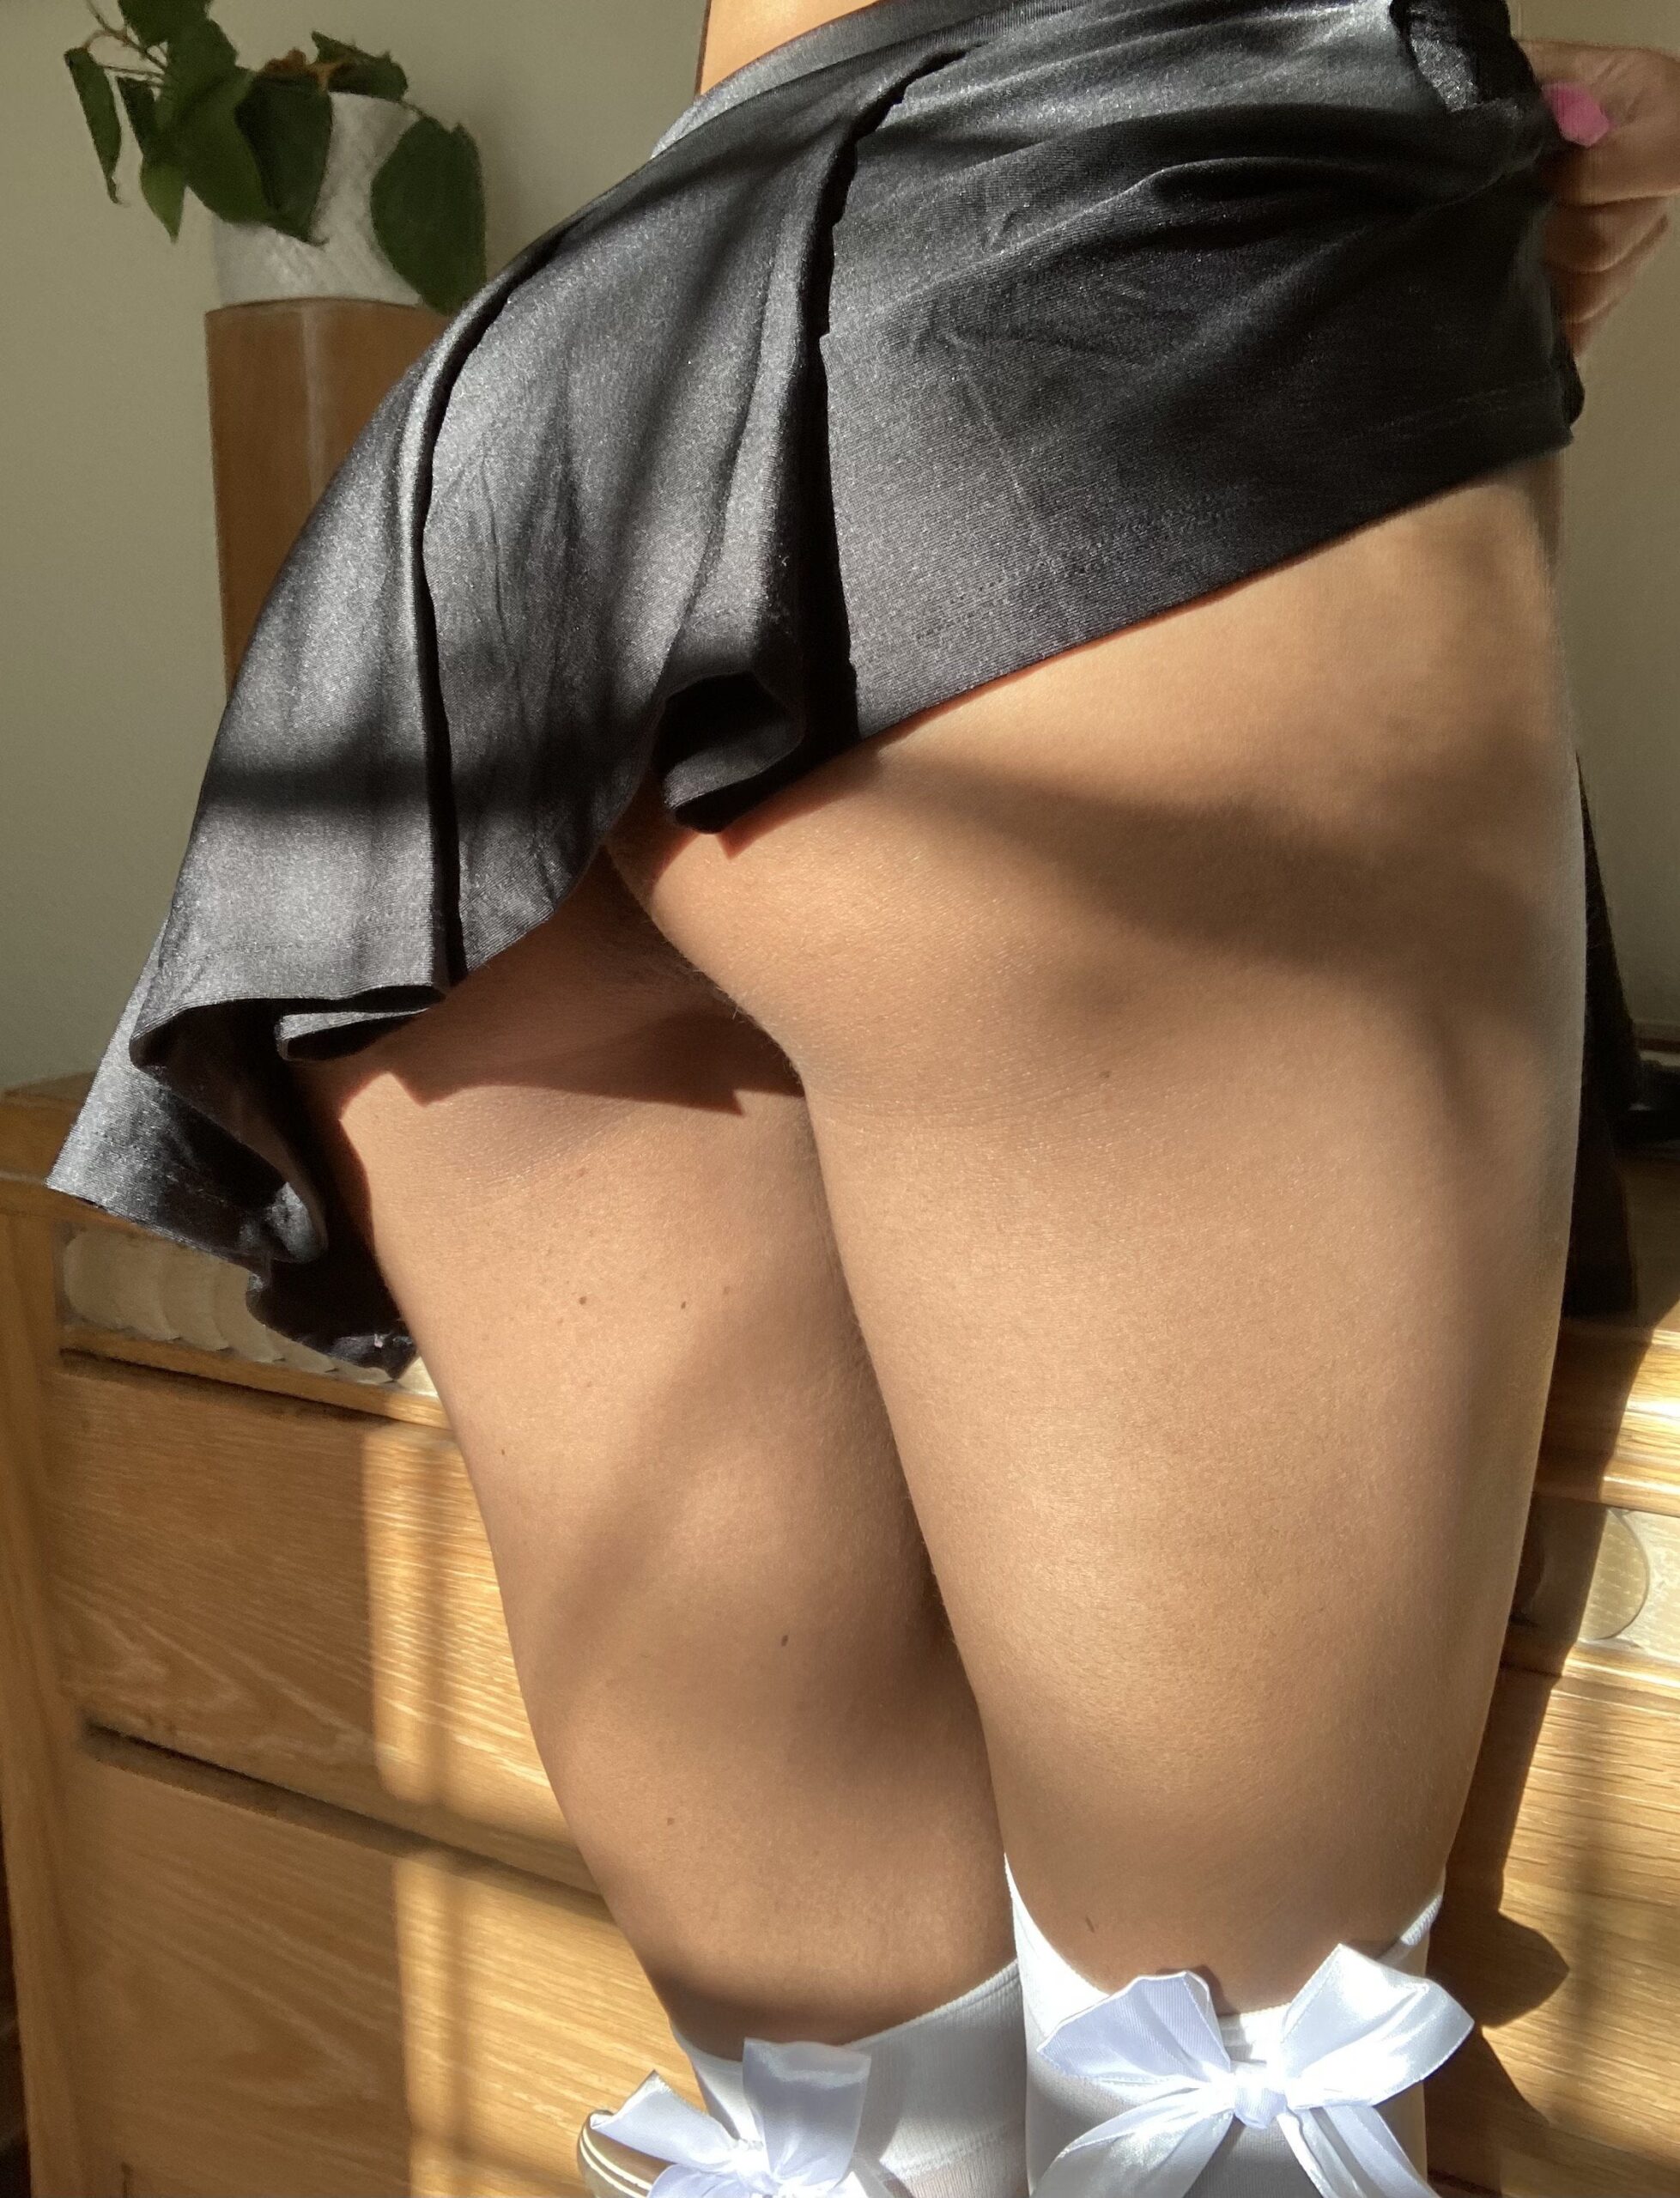 Eboby Porn -  would you wanna look up my miniskirt?